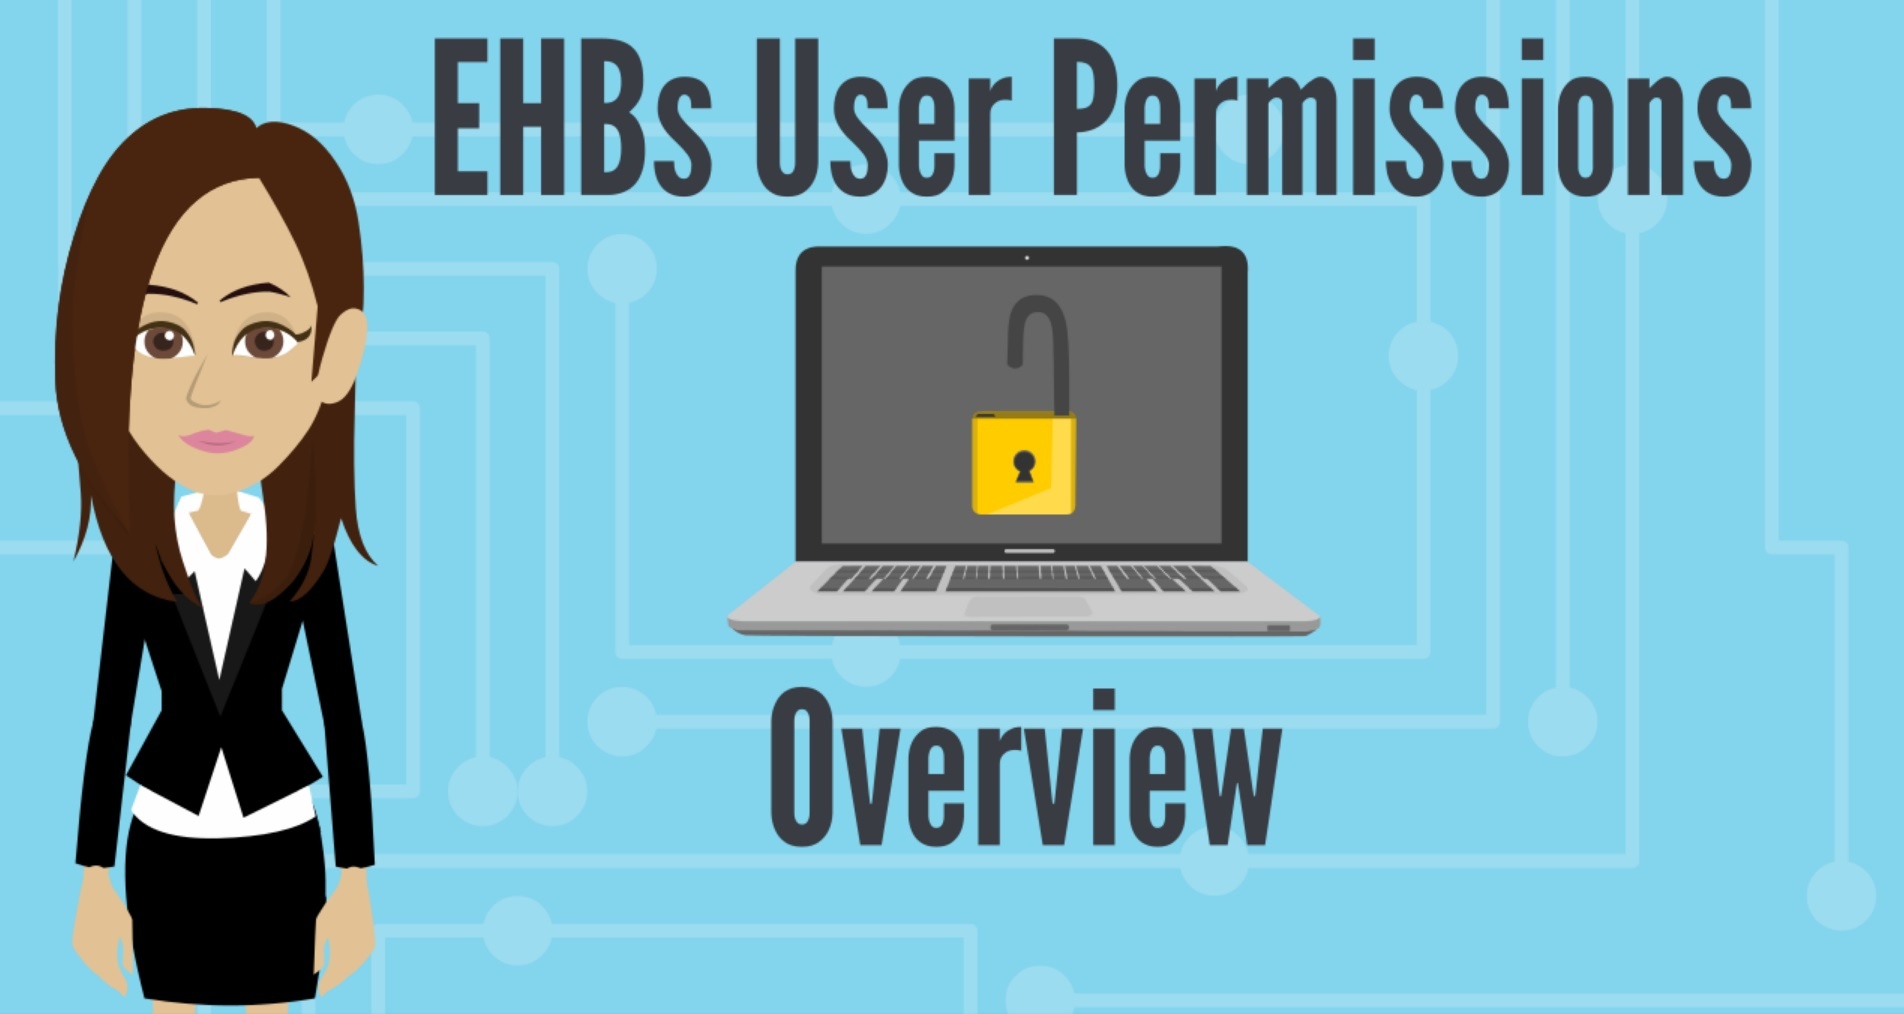 Image and Shortcut to EHBs Permissions Overview